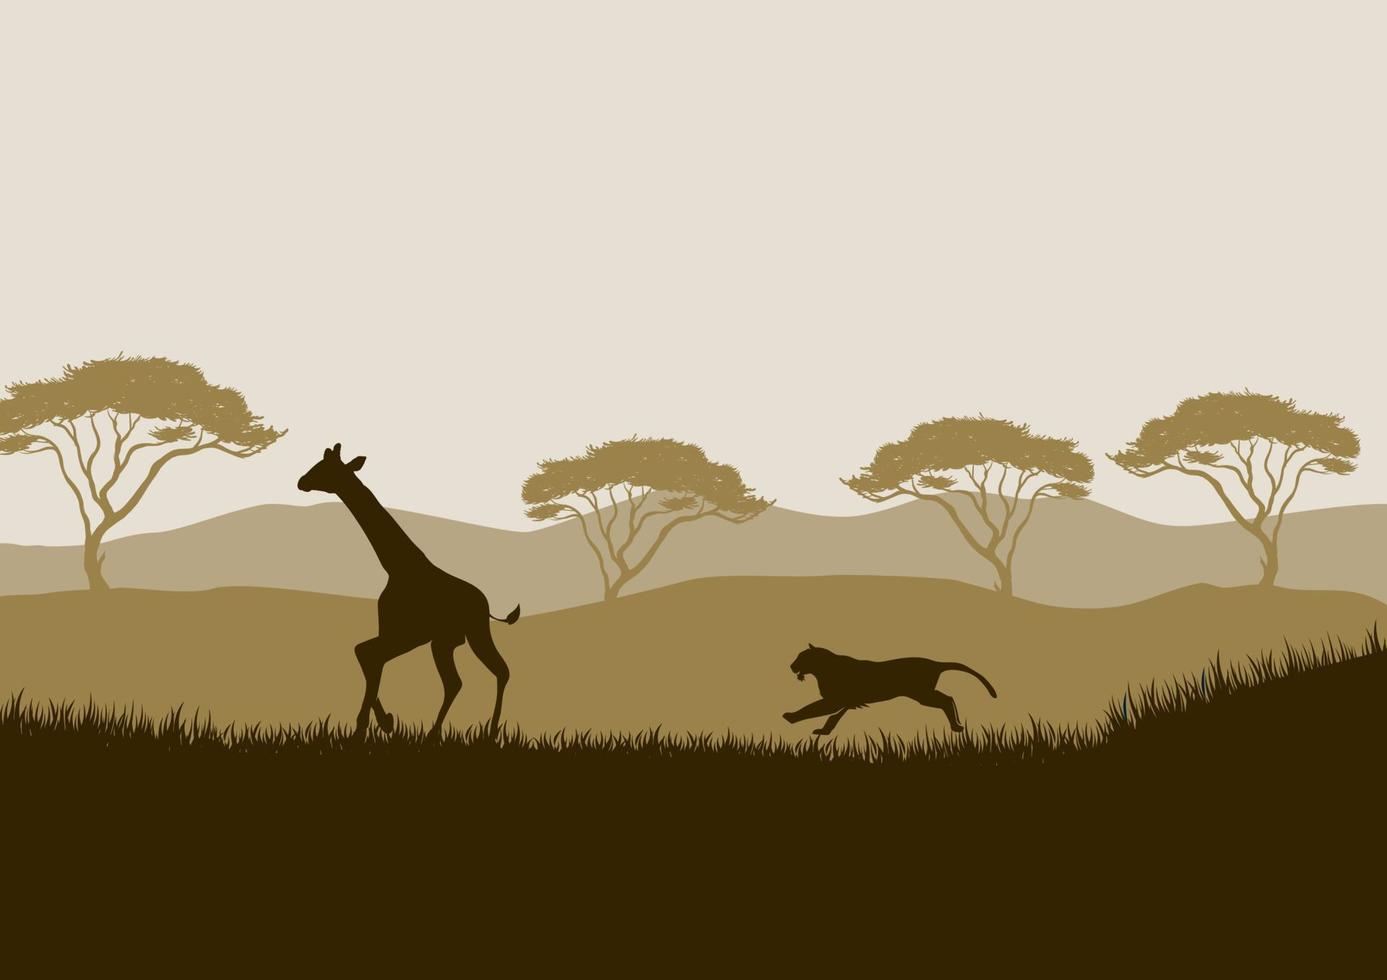 Giraffe and leopard silhouettes in the African savanna. vector illustration for background